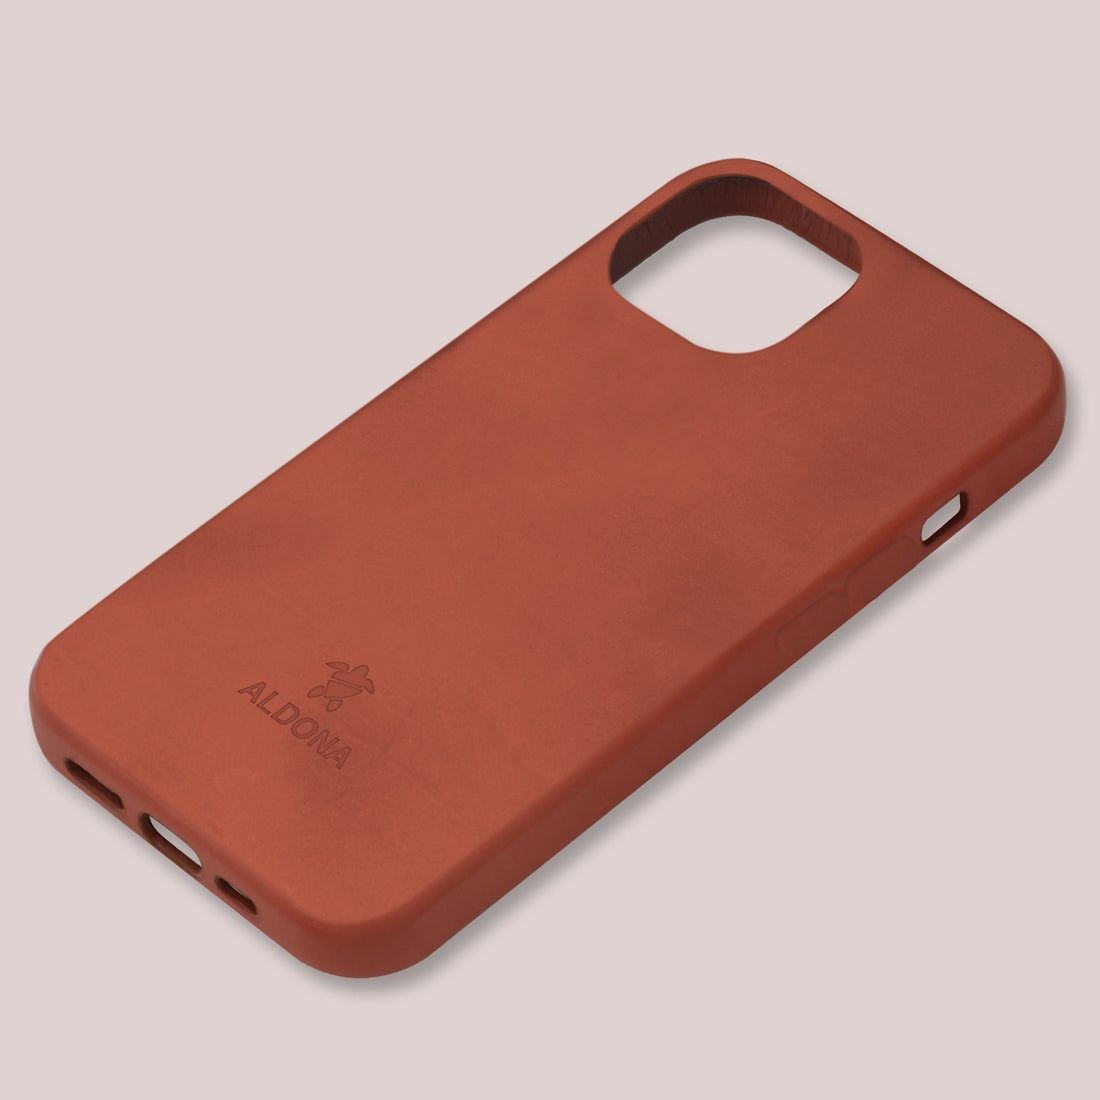 Kalon Case for iPhone 13 with MagSafe Compatibility - Dark Soil